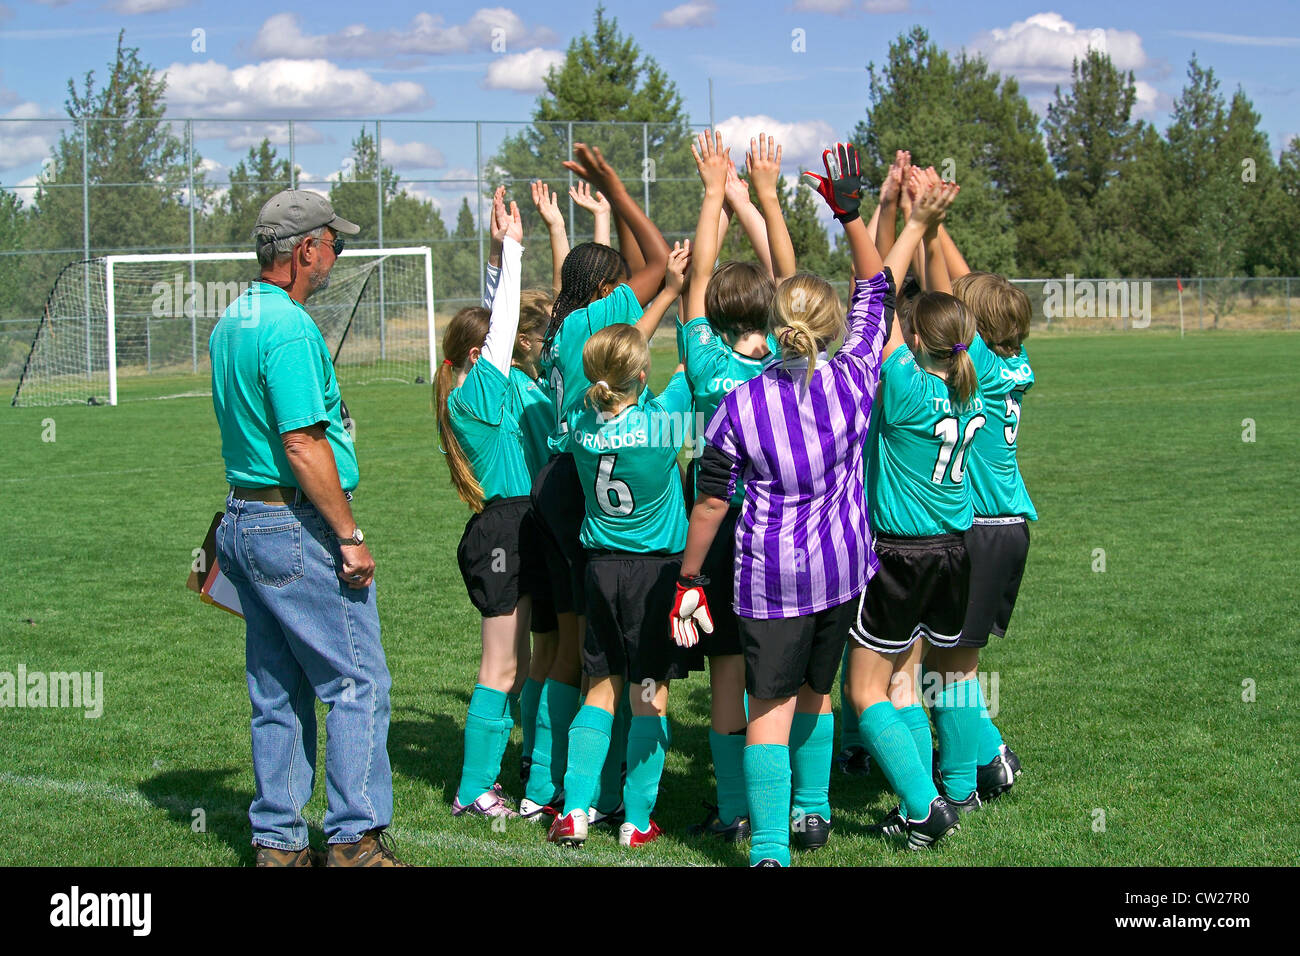 Young girls raise their hands in the air for a 'high five' team salute at the start of an after-school soccer match in Bend, Oregon, USA. Stock Photo